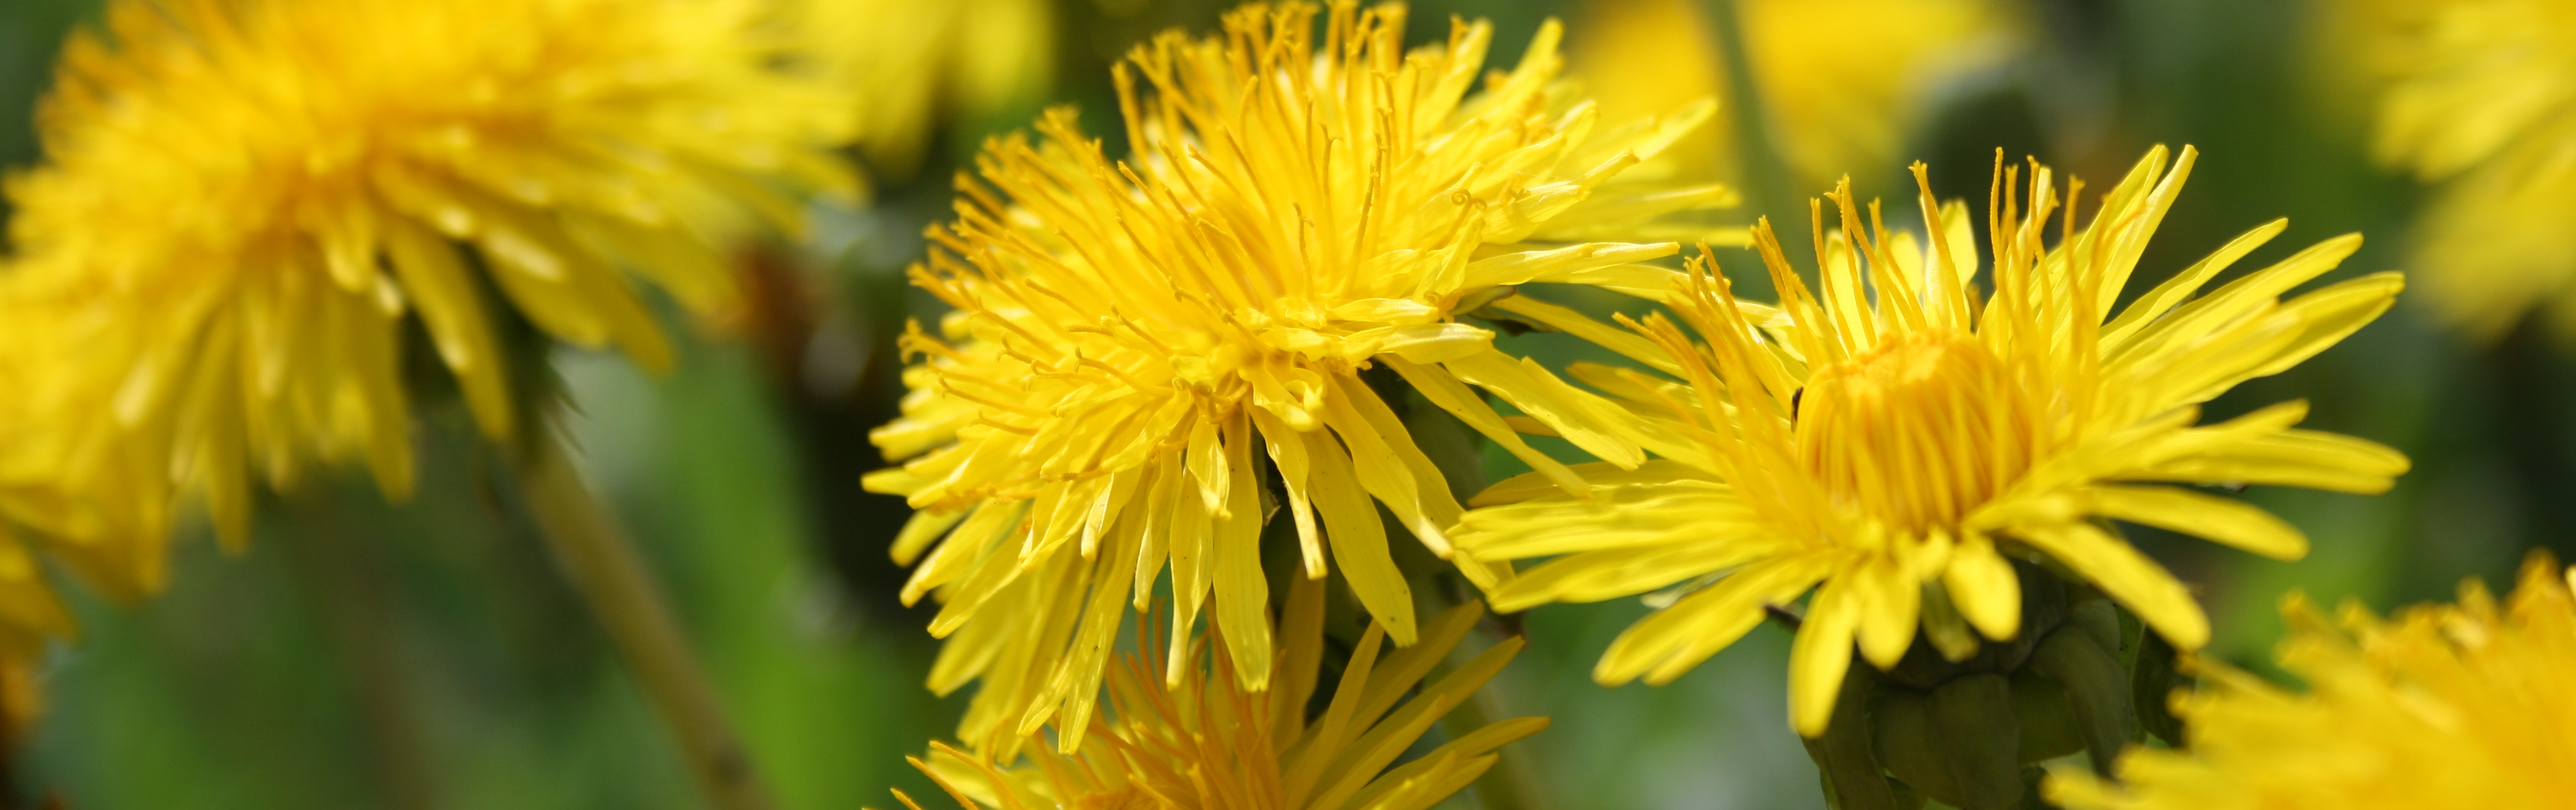 Some Thoughts on Open Learning: Ode to the Dandelion